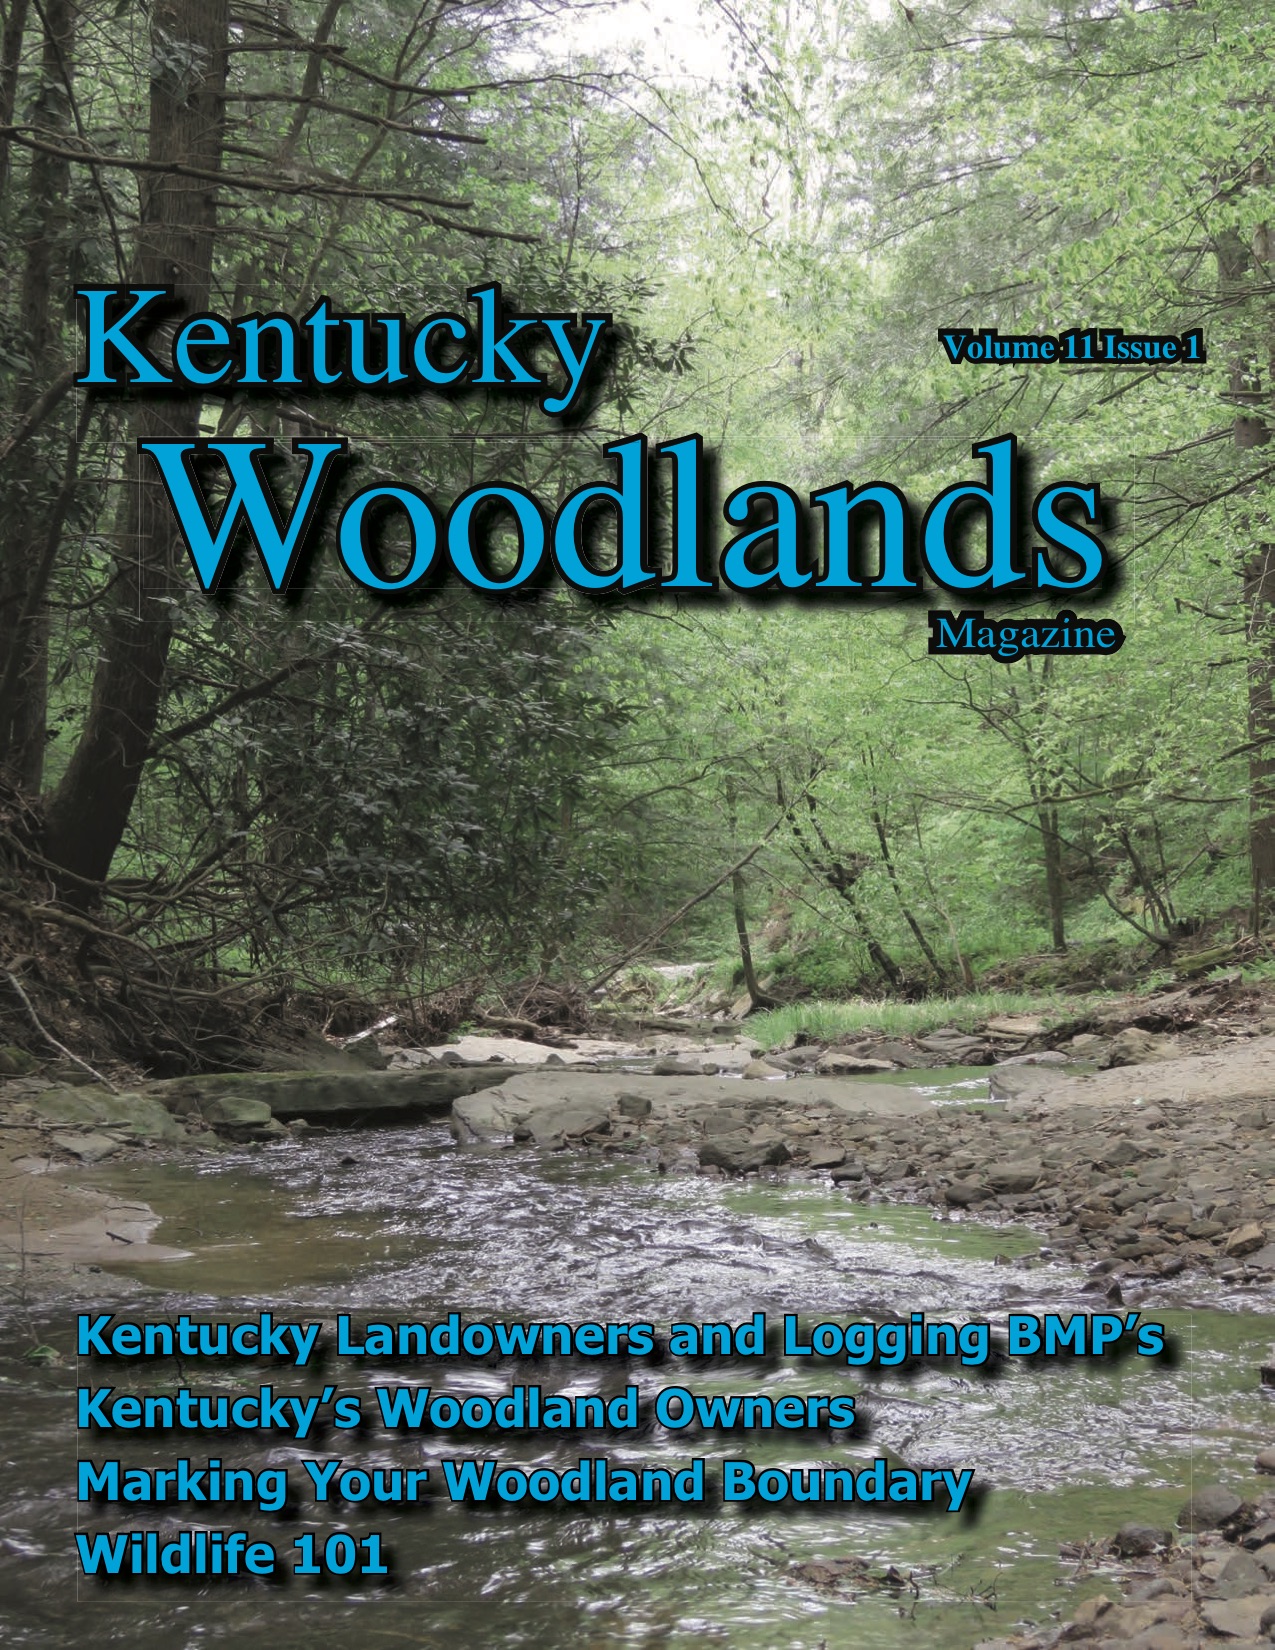 Kentucky Woodlands Magazine, Volume 11, Issue 1 Cover